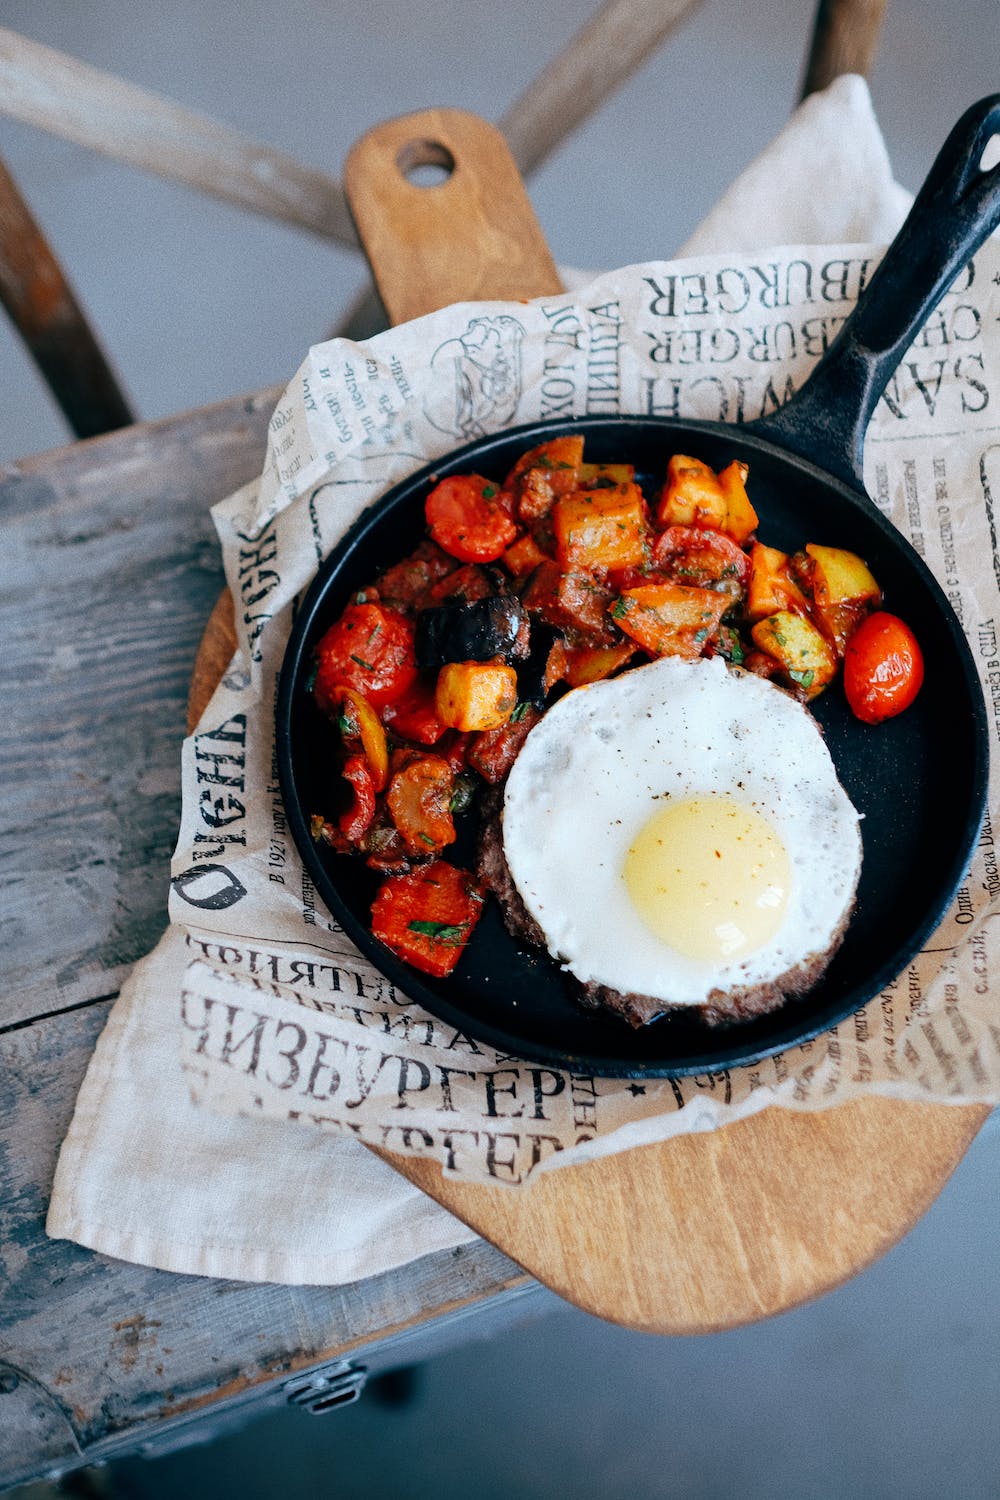 Cast-iron-skillet-Pan-with-roasted-veggies-and-steak-with-egg